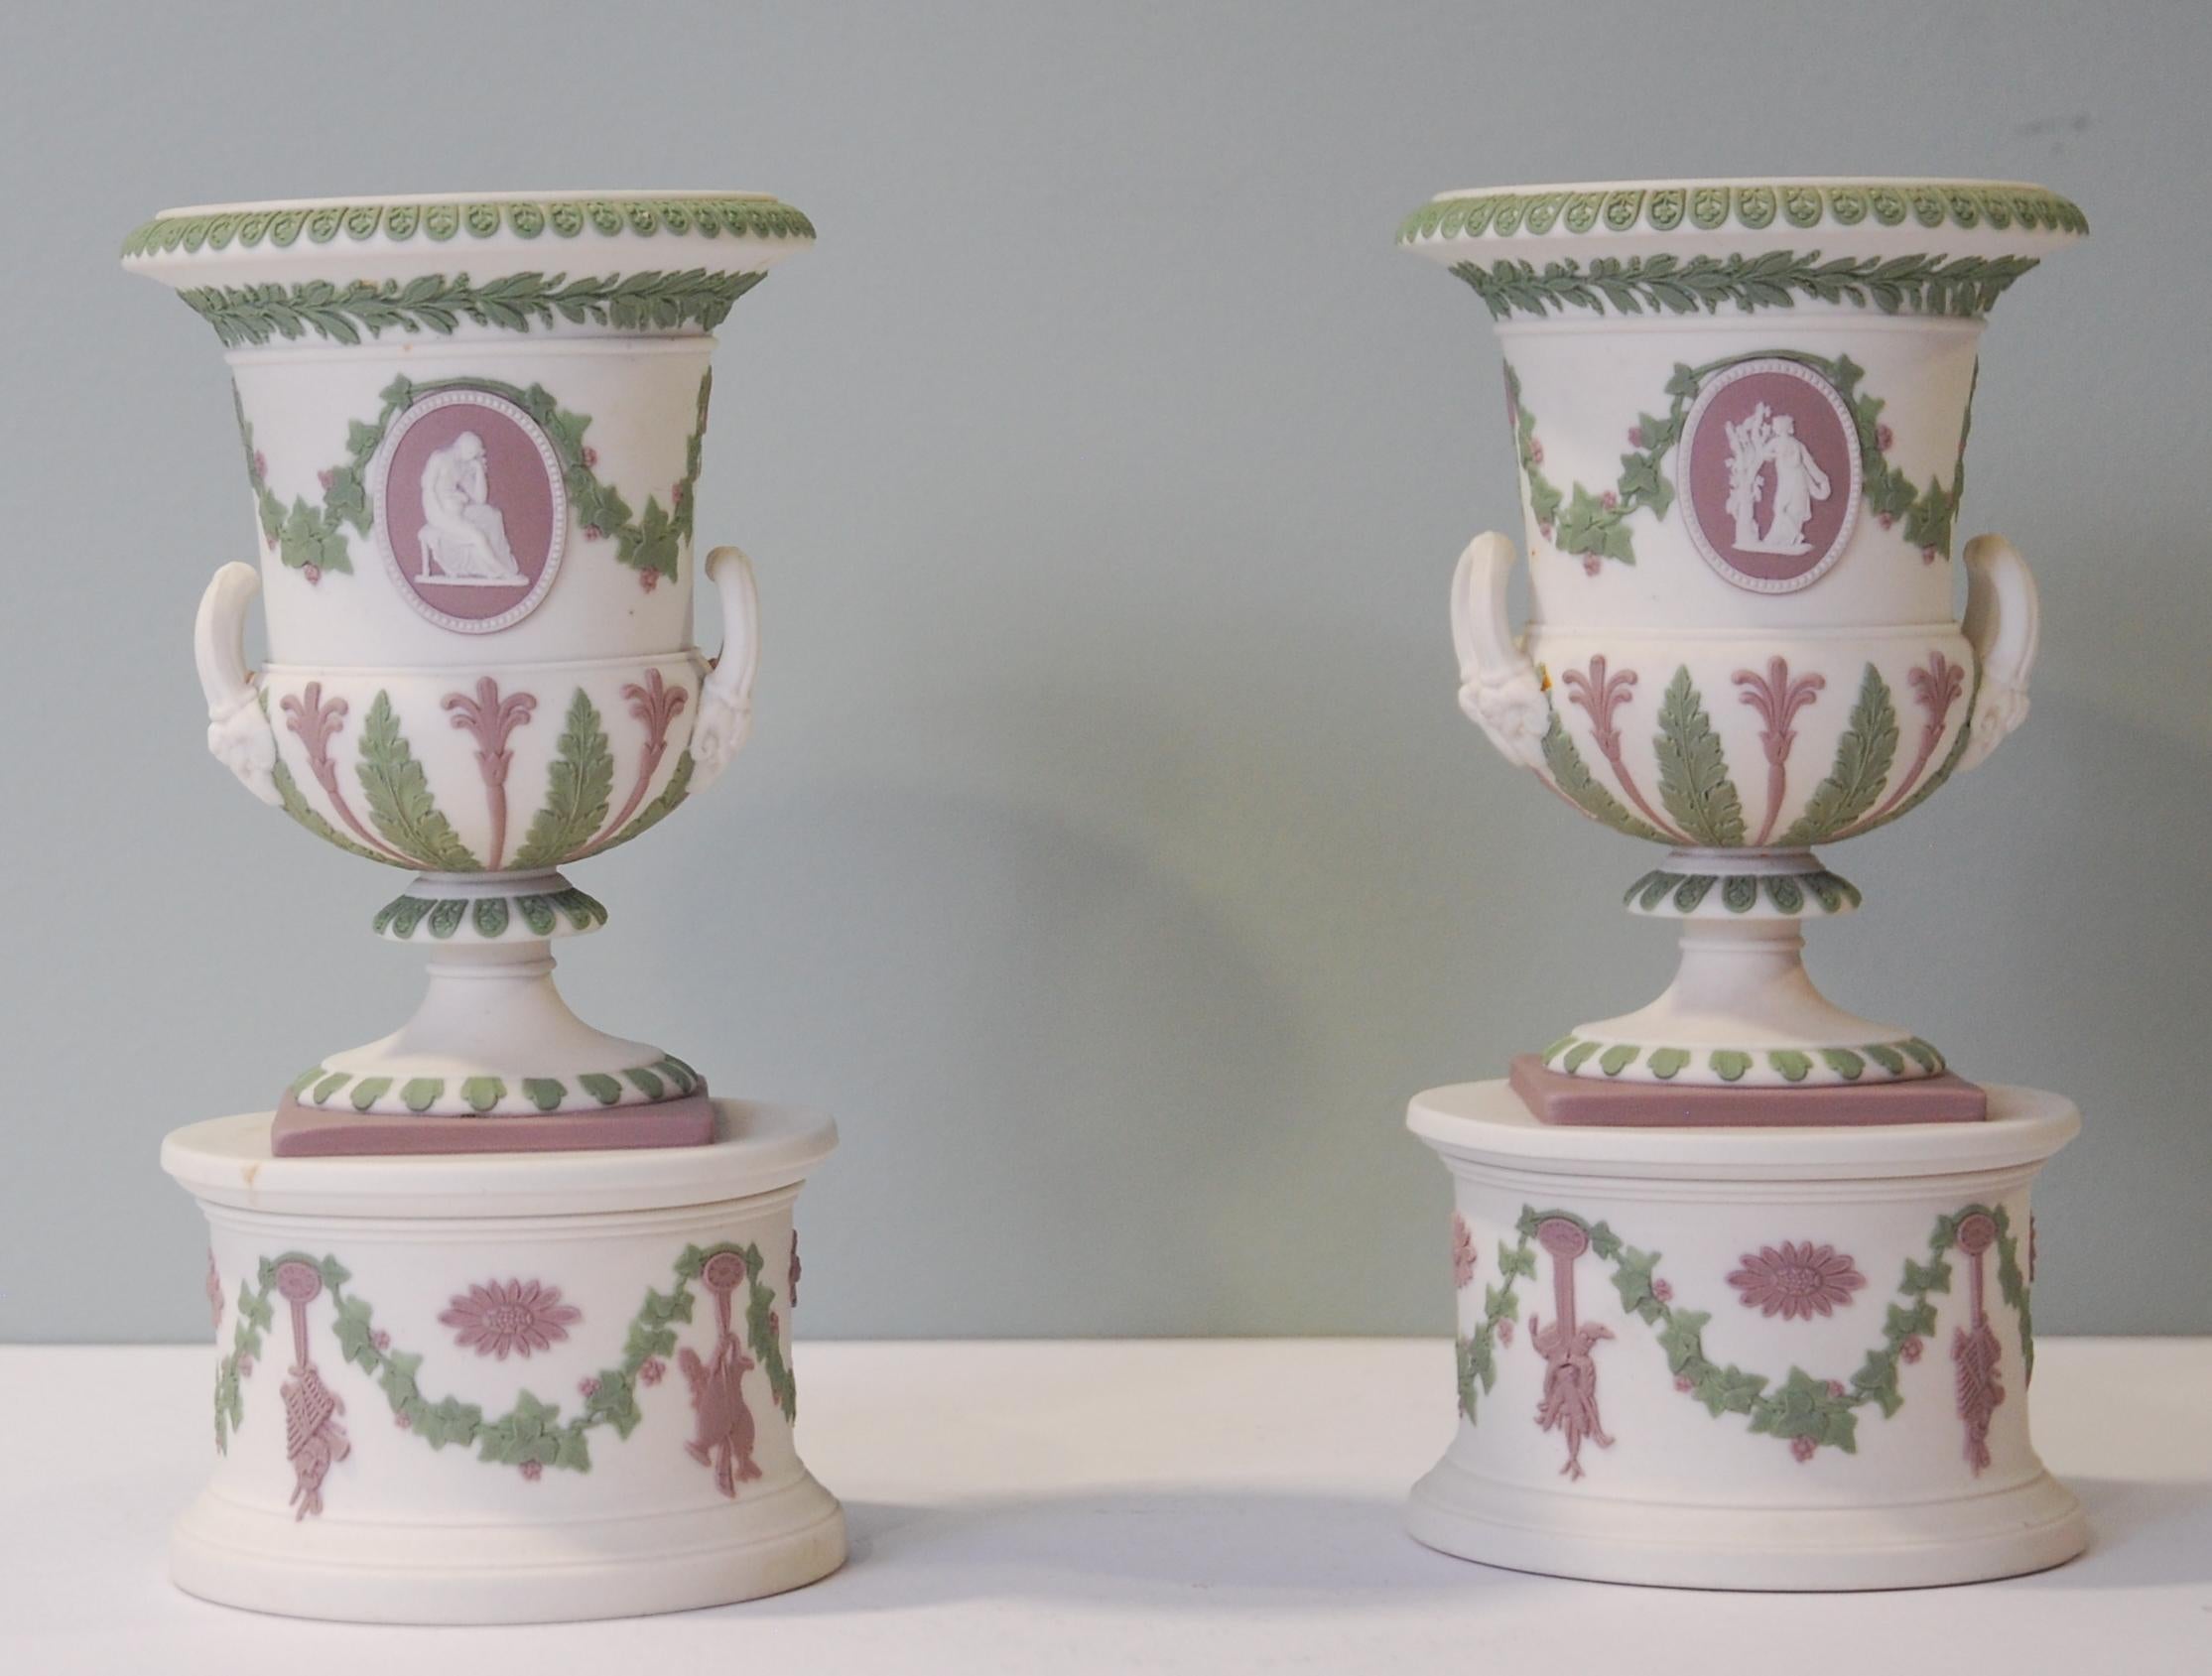 A rare pair of campana vases in white jasper with sage and lilac decoration, with pedestals. These were made as potpourri vases, and would have had lids orginally.
.